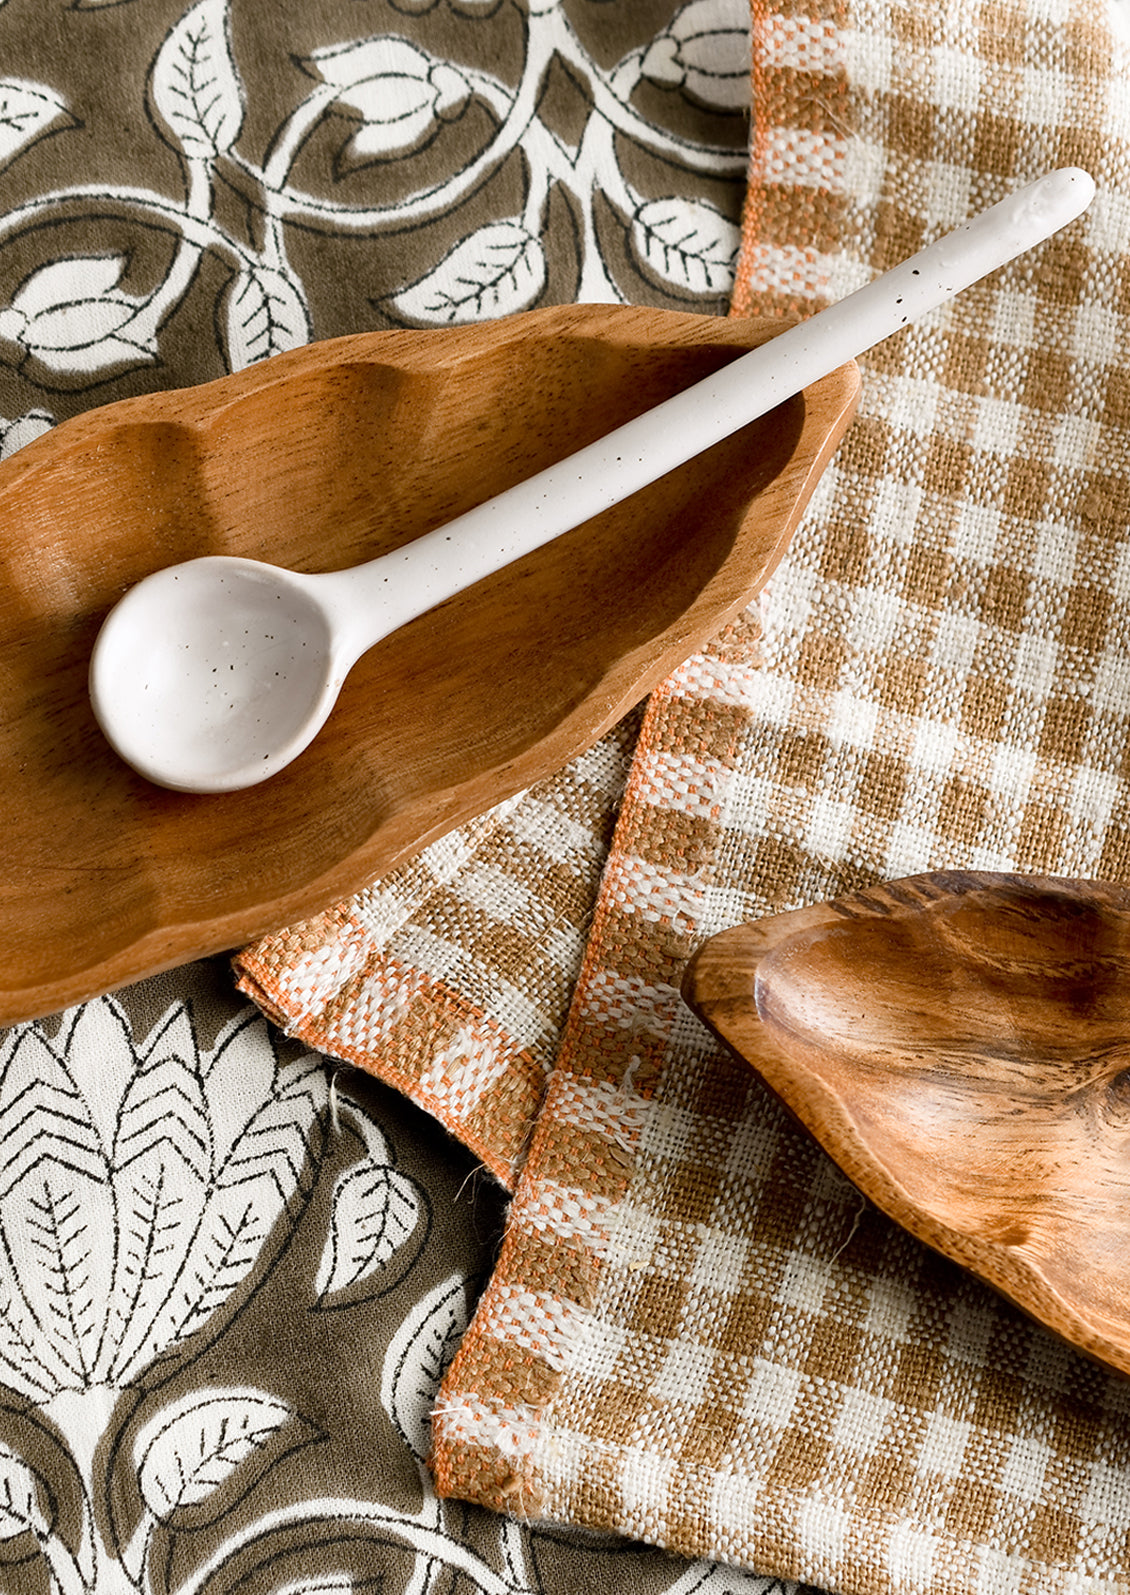 Wooden dishes styled with textiles and spoon.